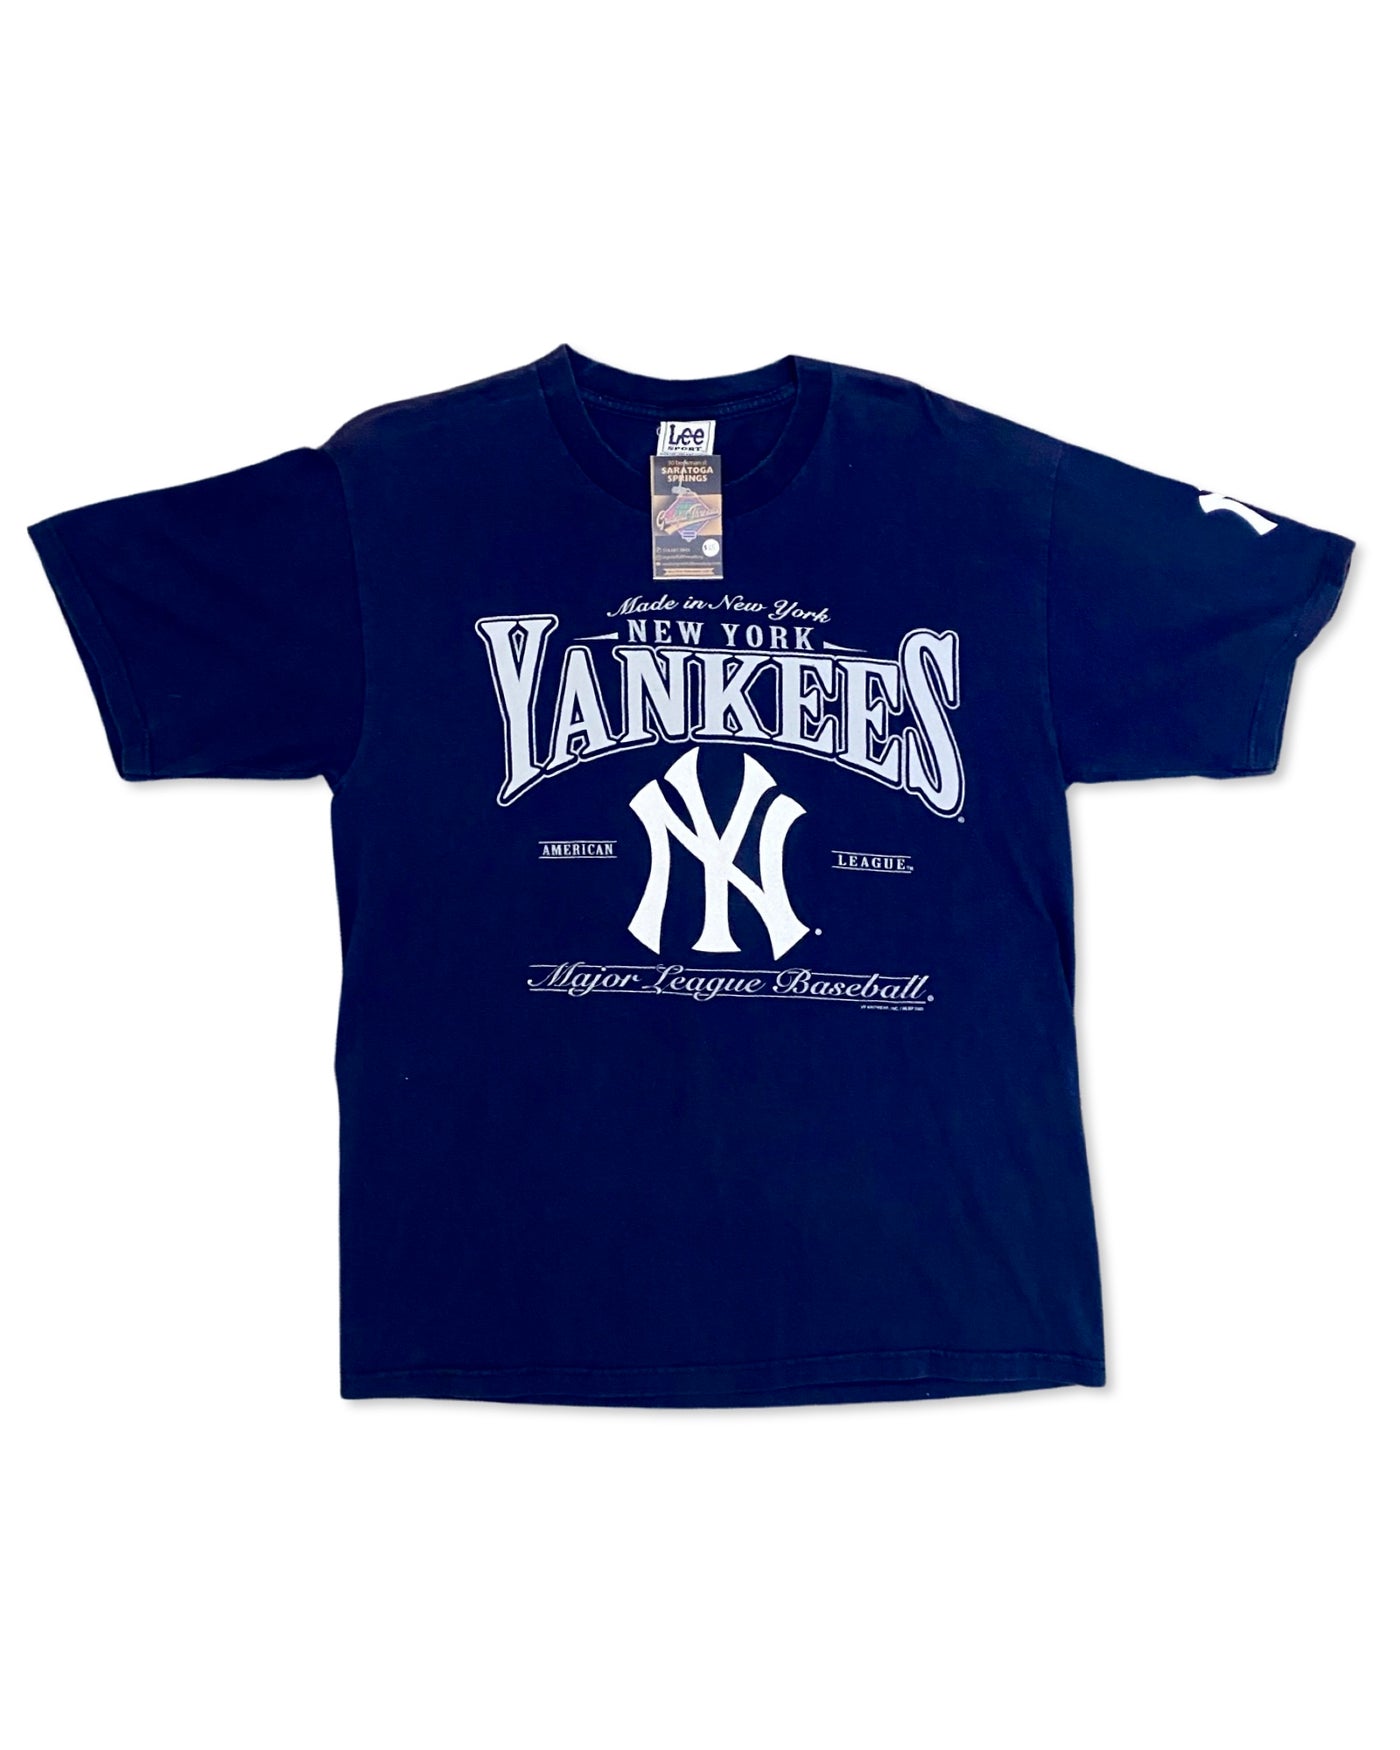 Vintage 2000 New York Yankees Spellout T-Shirt